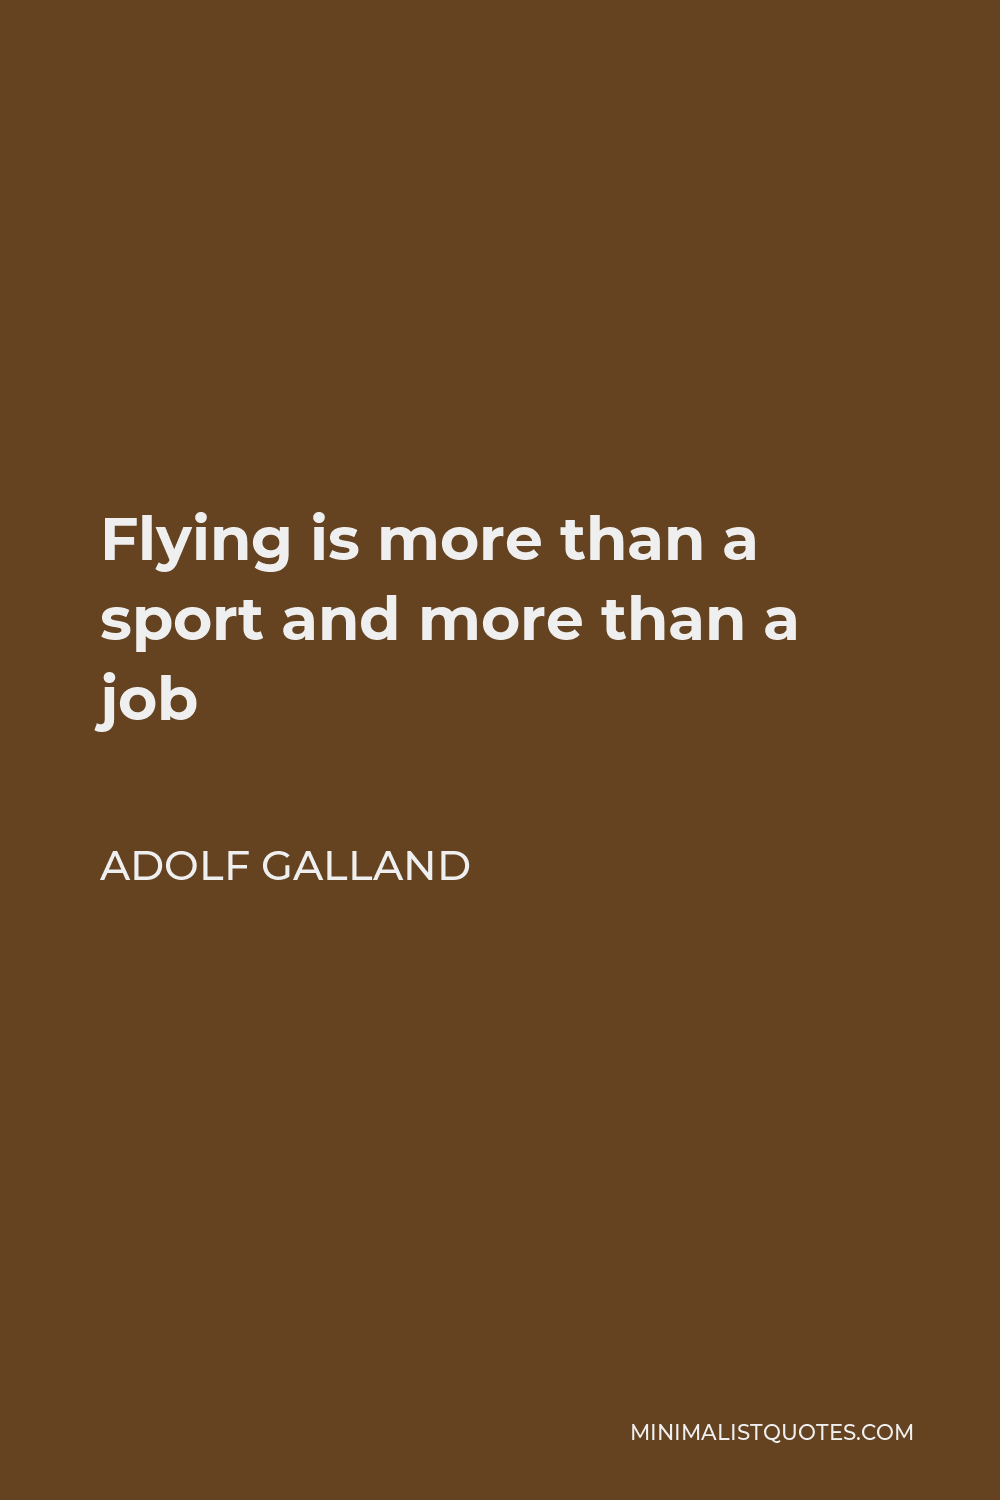 Adolf Galland Quote - Flying is more than a sport and more than a job